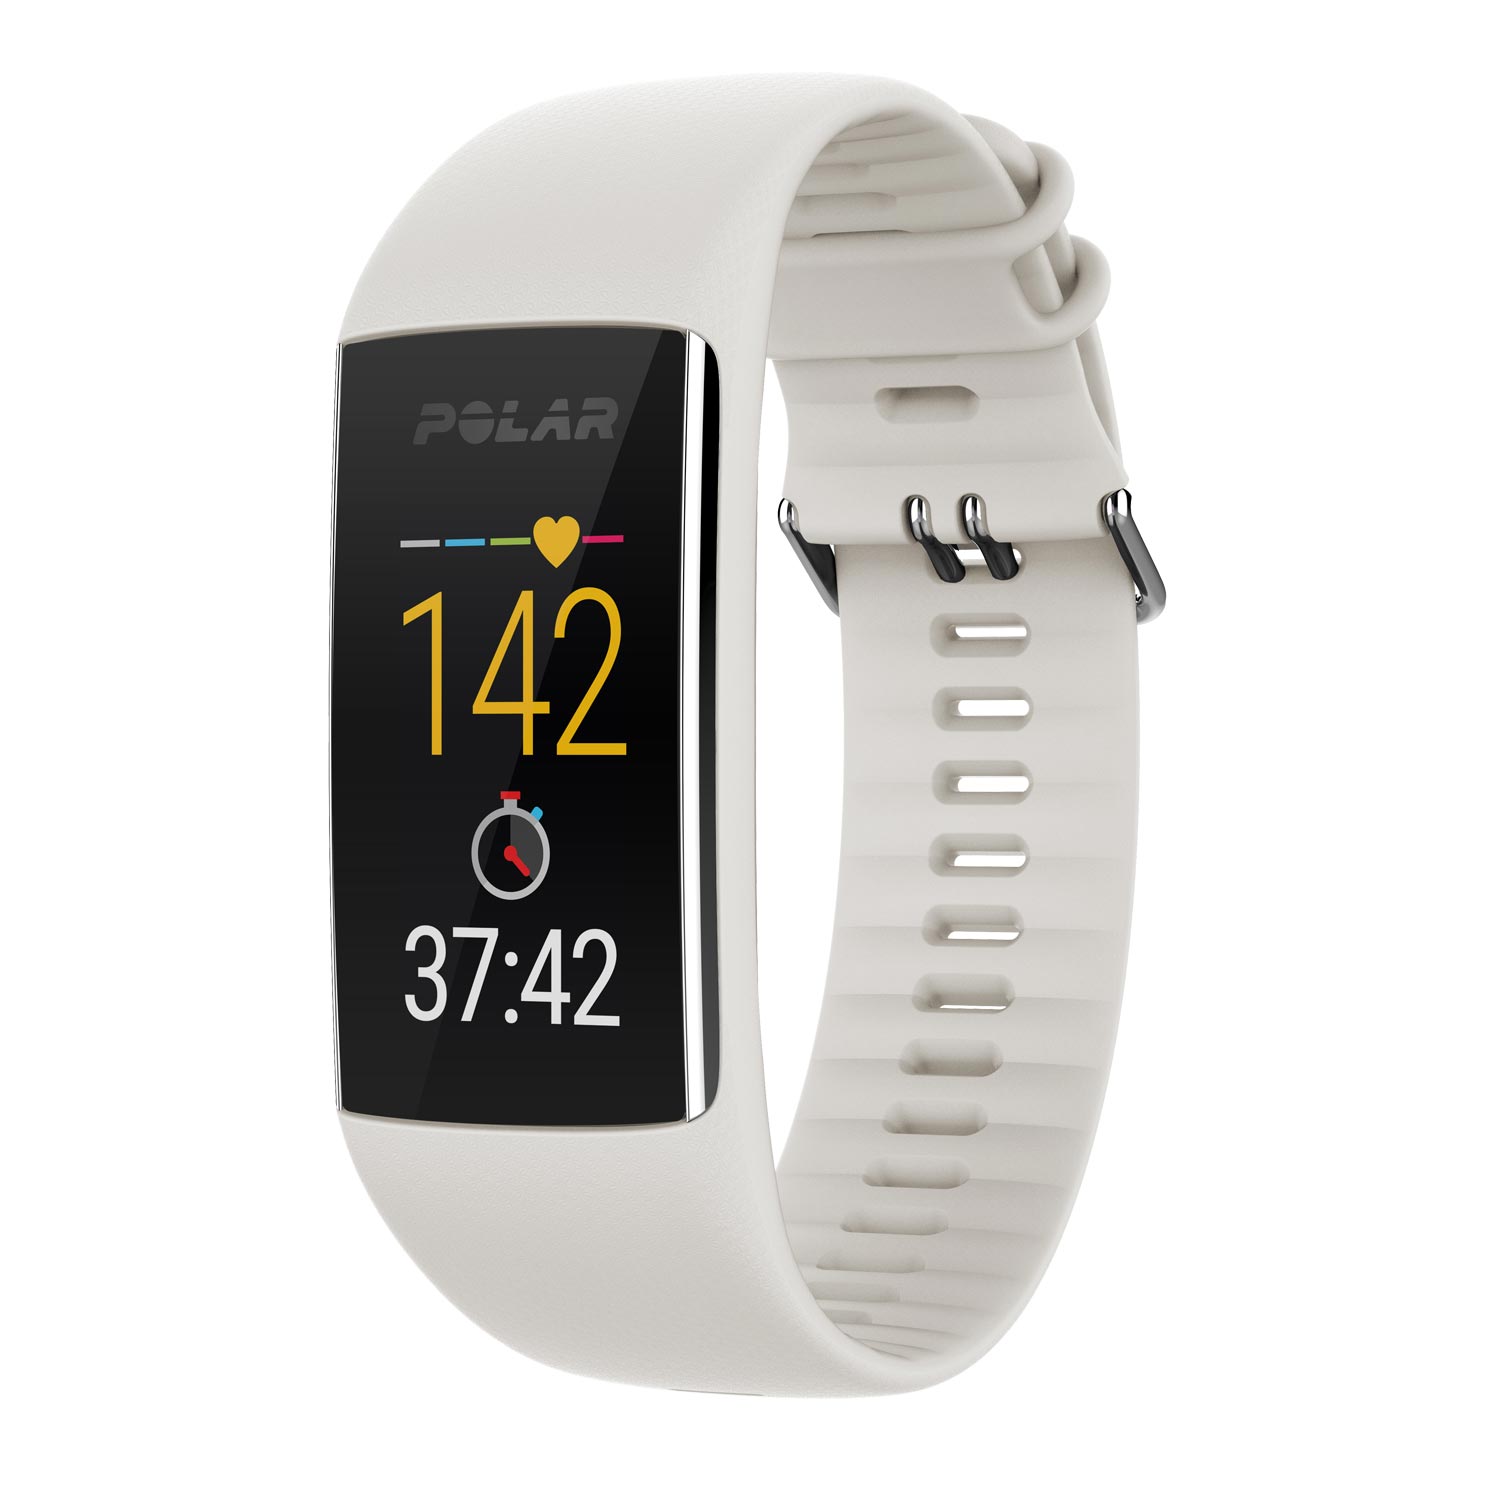 Polar Fitness Tracker A370 – Back In Action